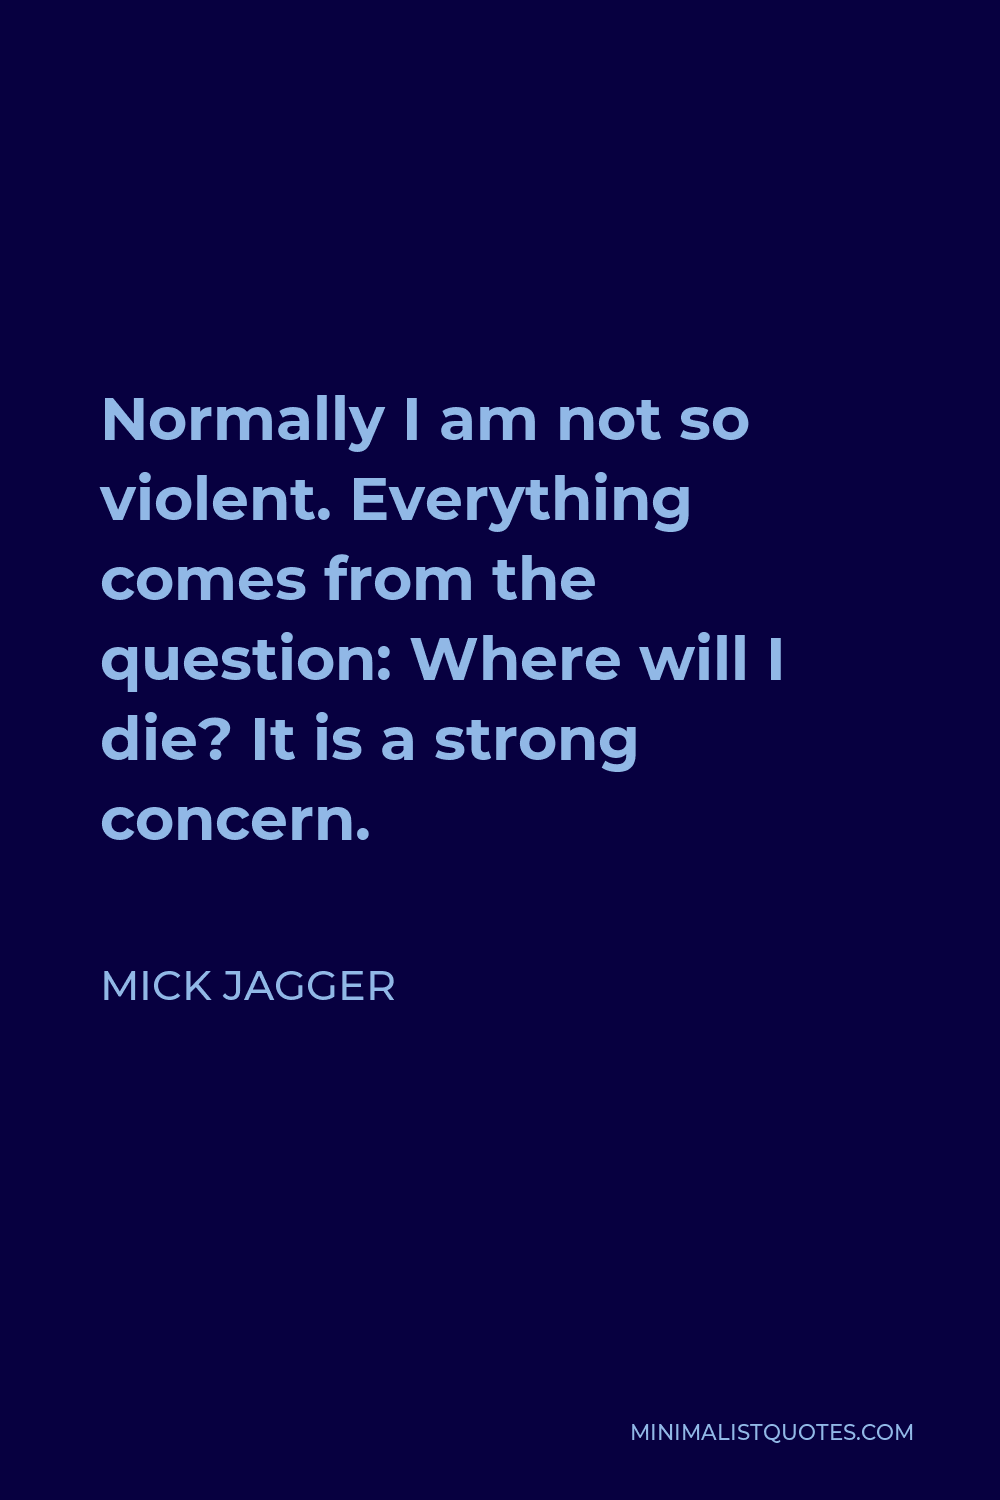 Mick Jagger Quote - Normally I am not so violent. Everything comes from the question: Where will I die? It is a strong concern.